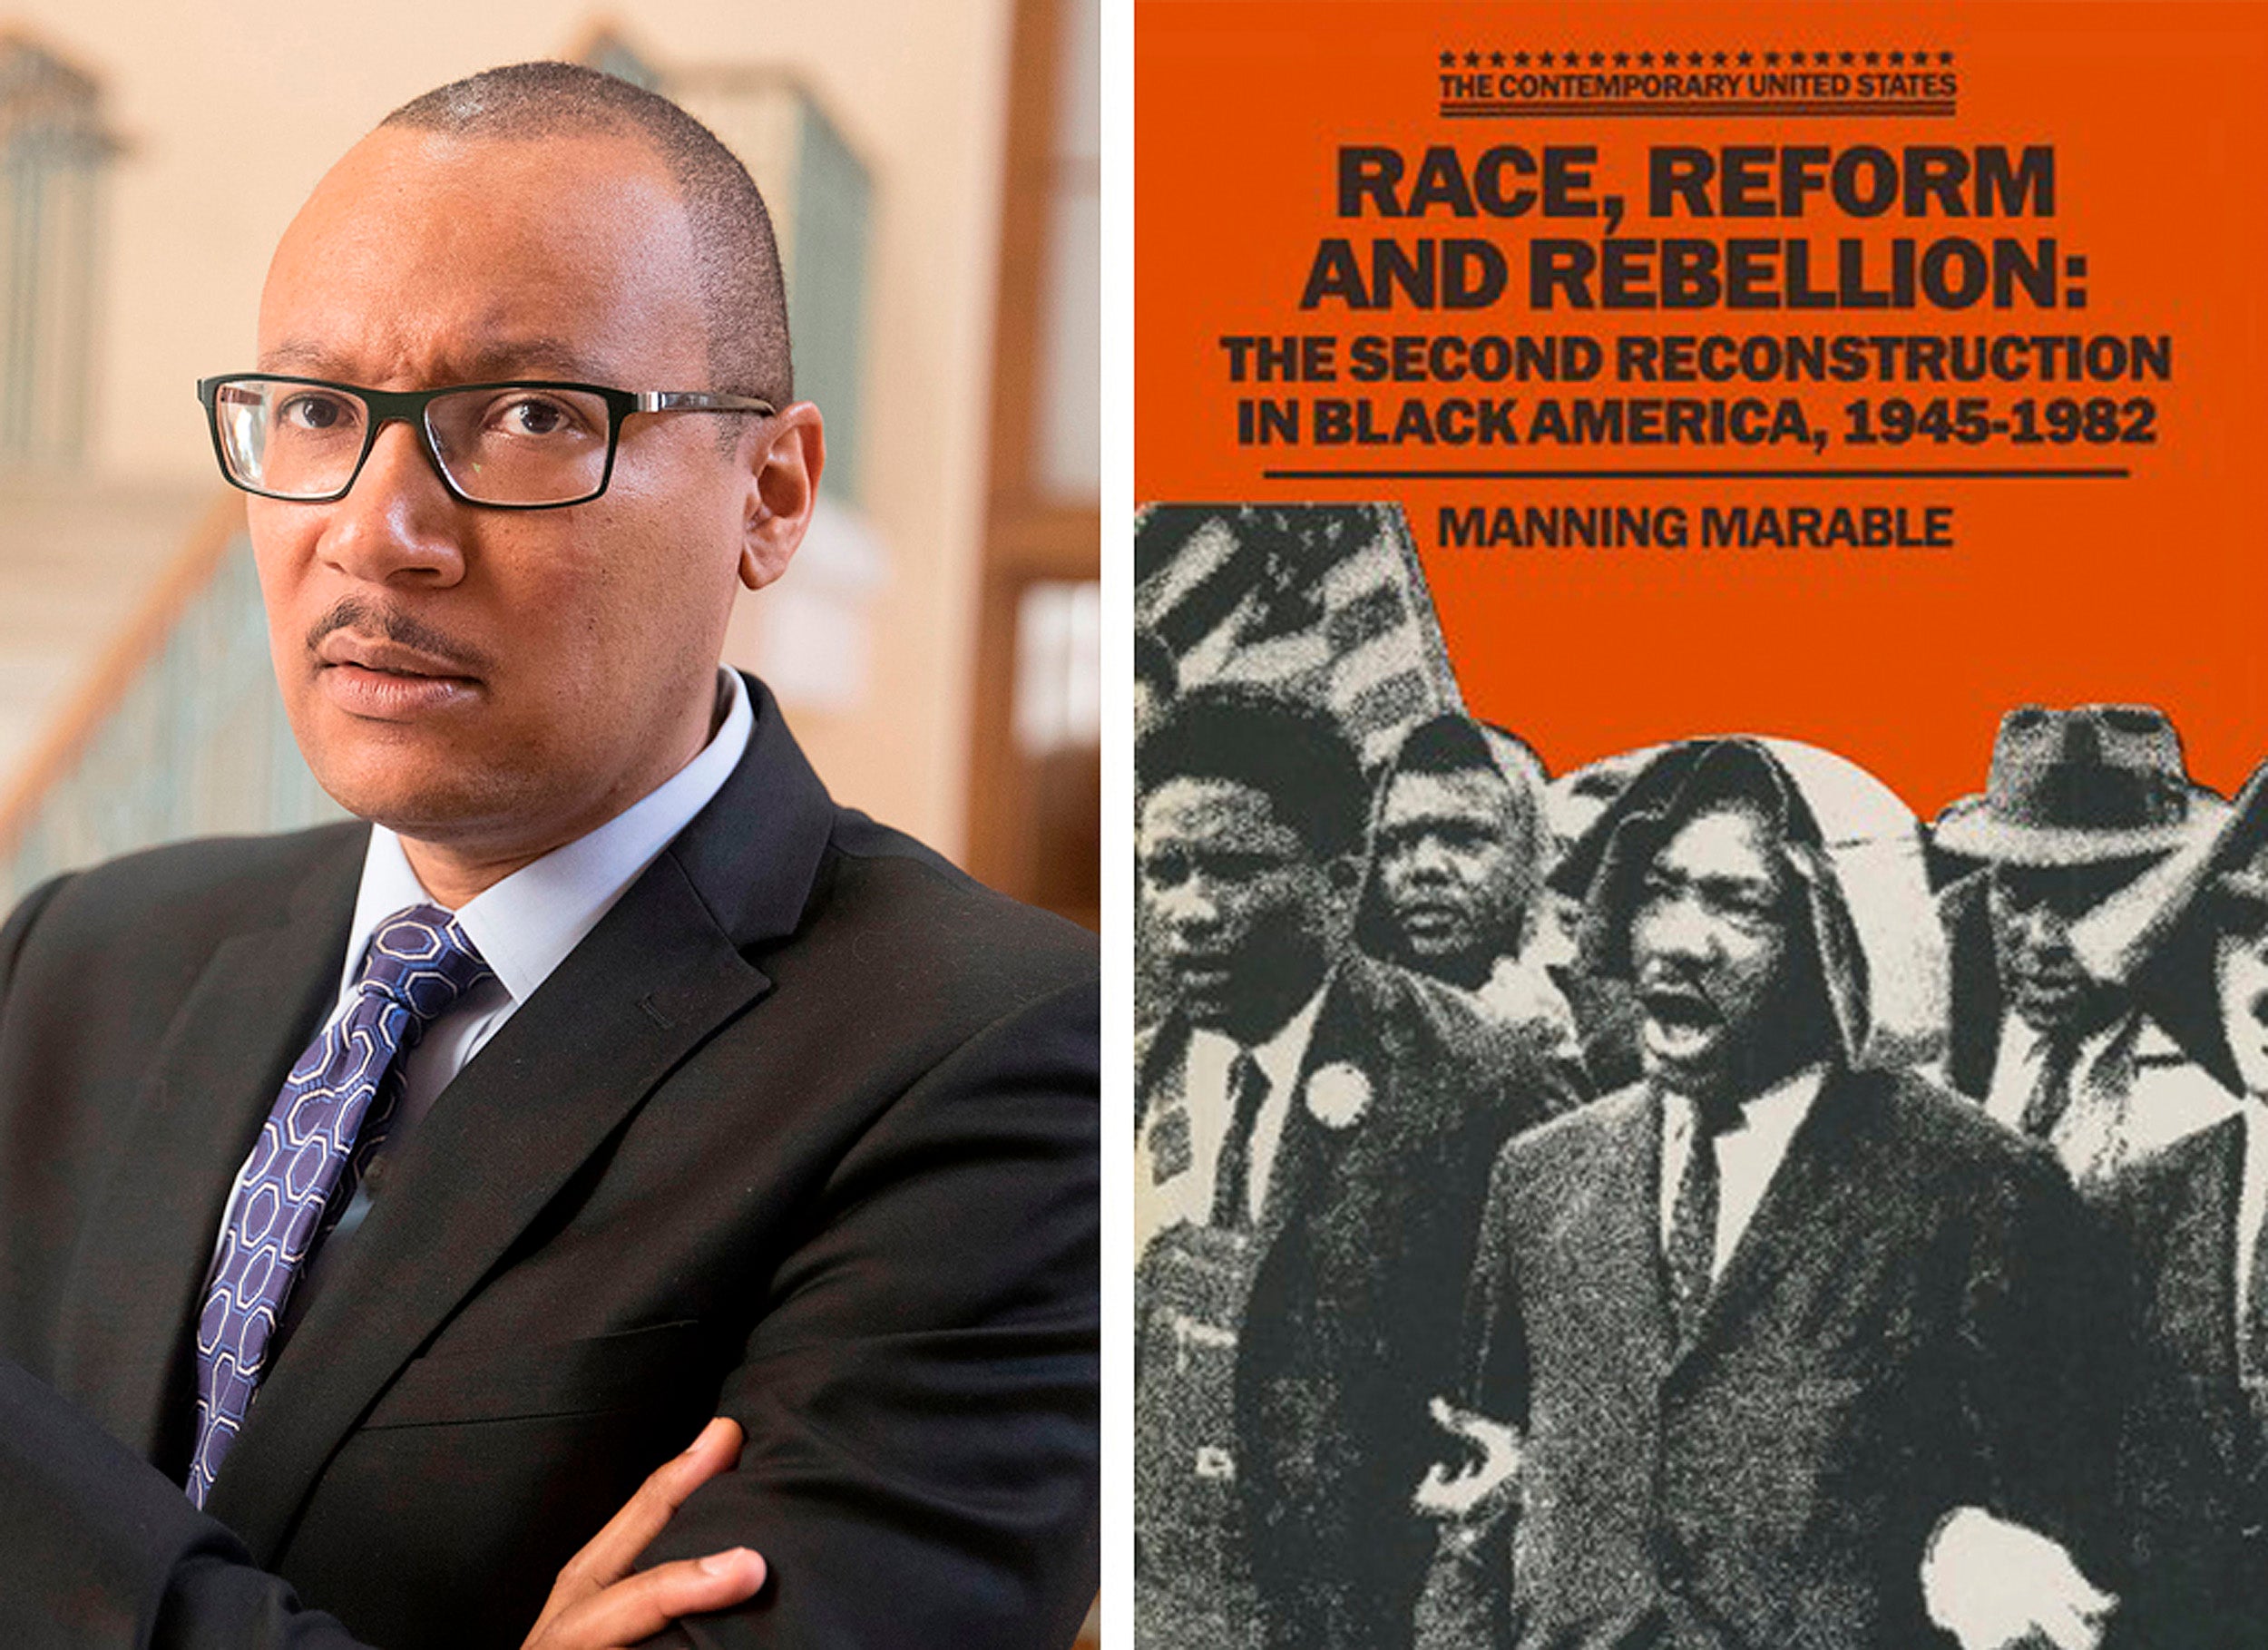 Tommie Shelby and Race, Reform, and Rebellion book cover.